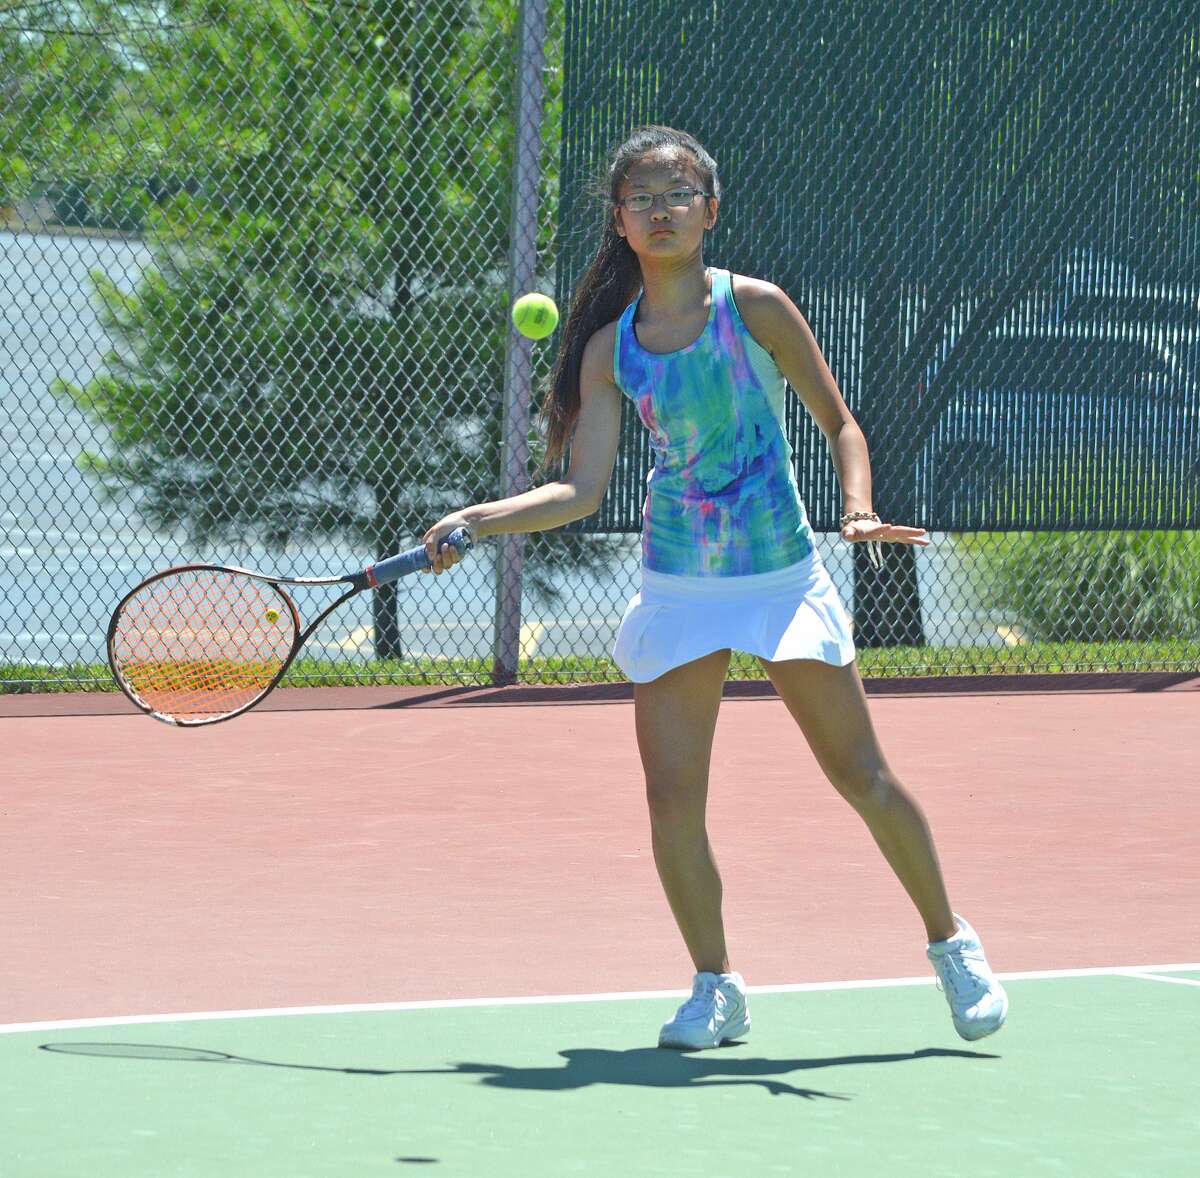 Chloe Koons, who will be a seventh-grader at Liberty Middle School, makes a forehand return during her girls’ 12 singles final at the Tiger Tennis Classic on Sunday.